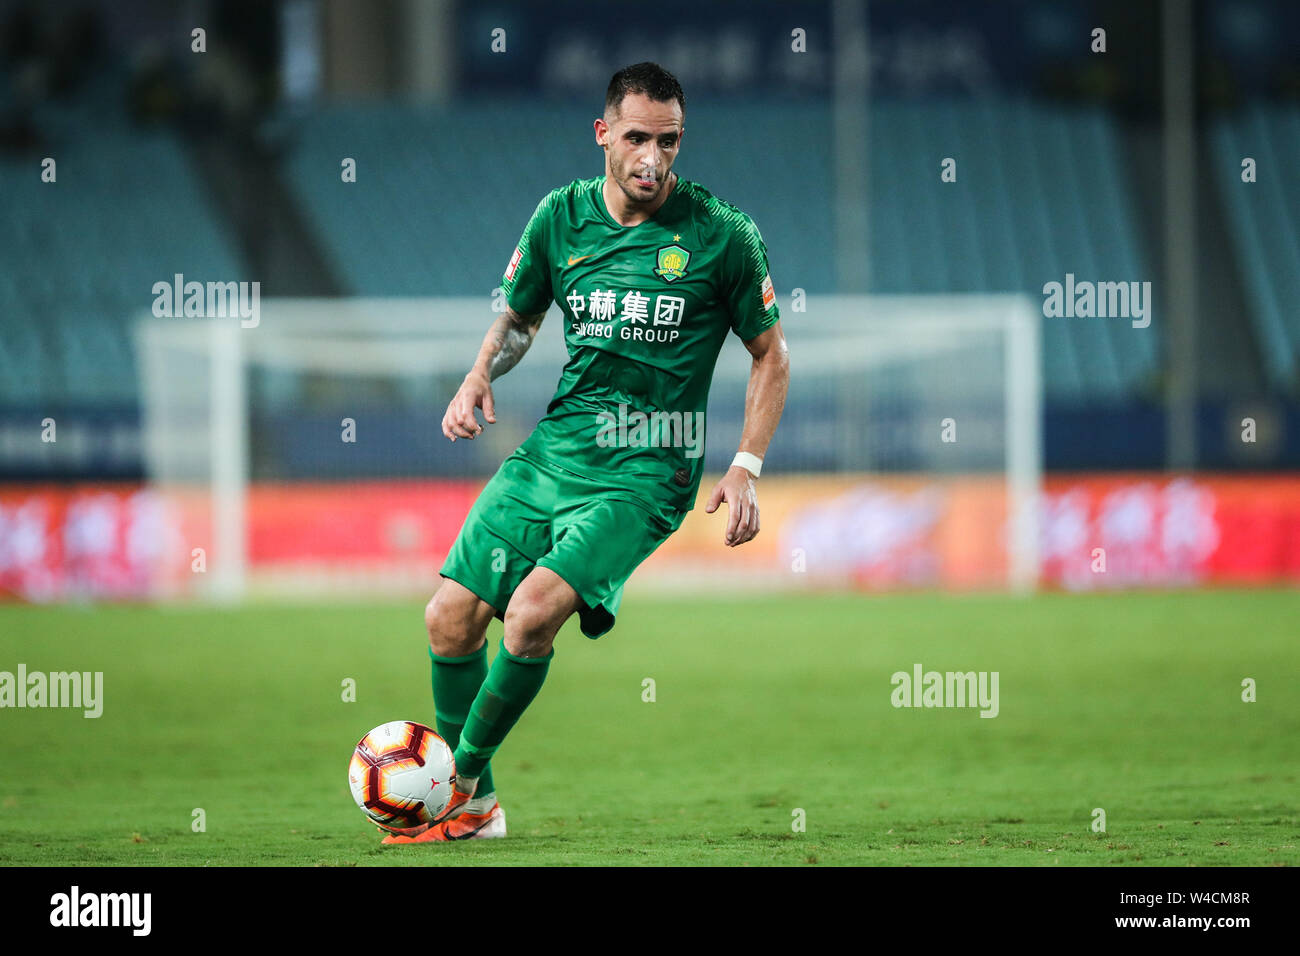 Brazilian football player Renato Soares de Oliveira Augusto, or simply Renato Augusto, of Beijing Sinobo Guoan F.C. keeps the ball during the 19th round of Chinese Football Association Super League (CSL) against Jiangsu Suning in Nanjing, east China’s Jiangsu province on 21 July 2019. Jiangsu Suning wins in the match with a 1-0. Stock Photo